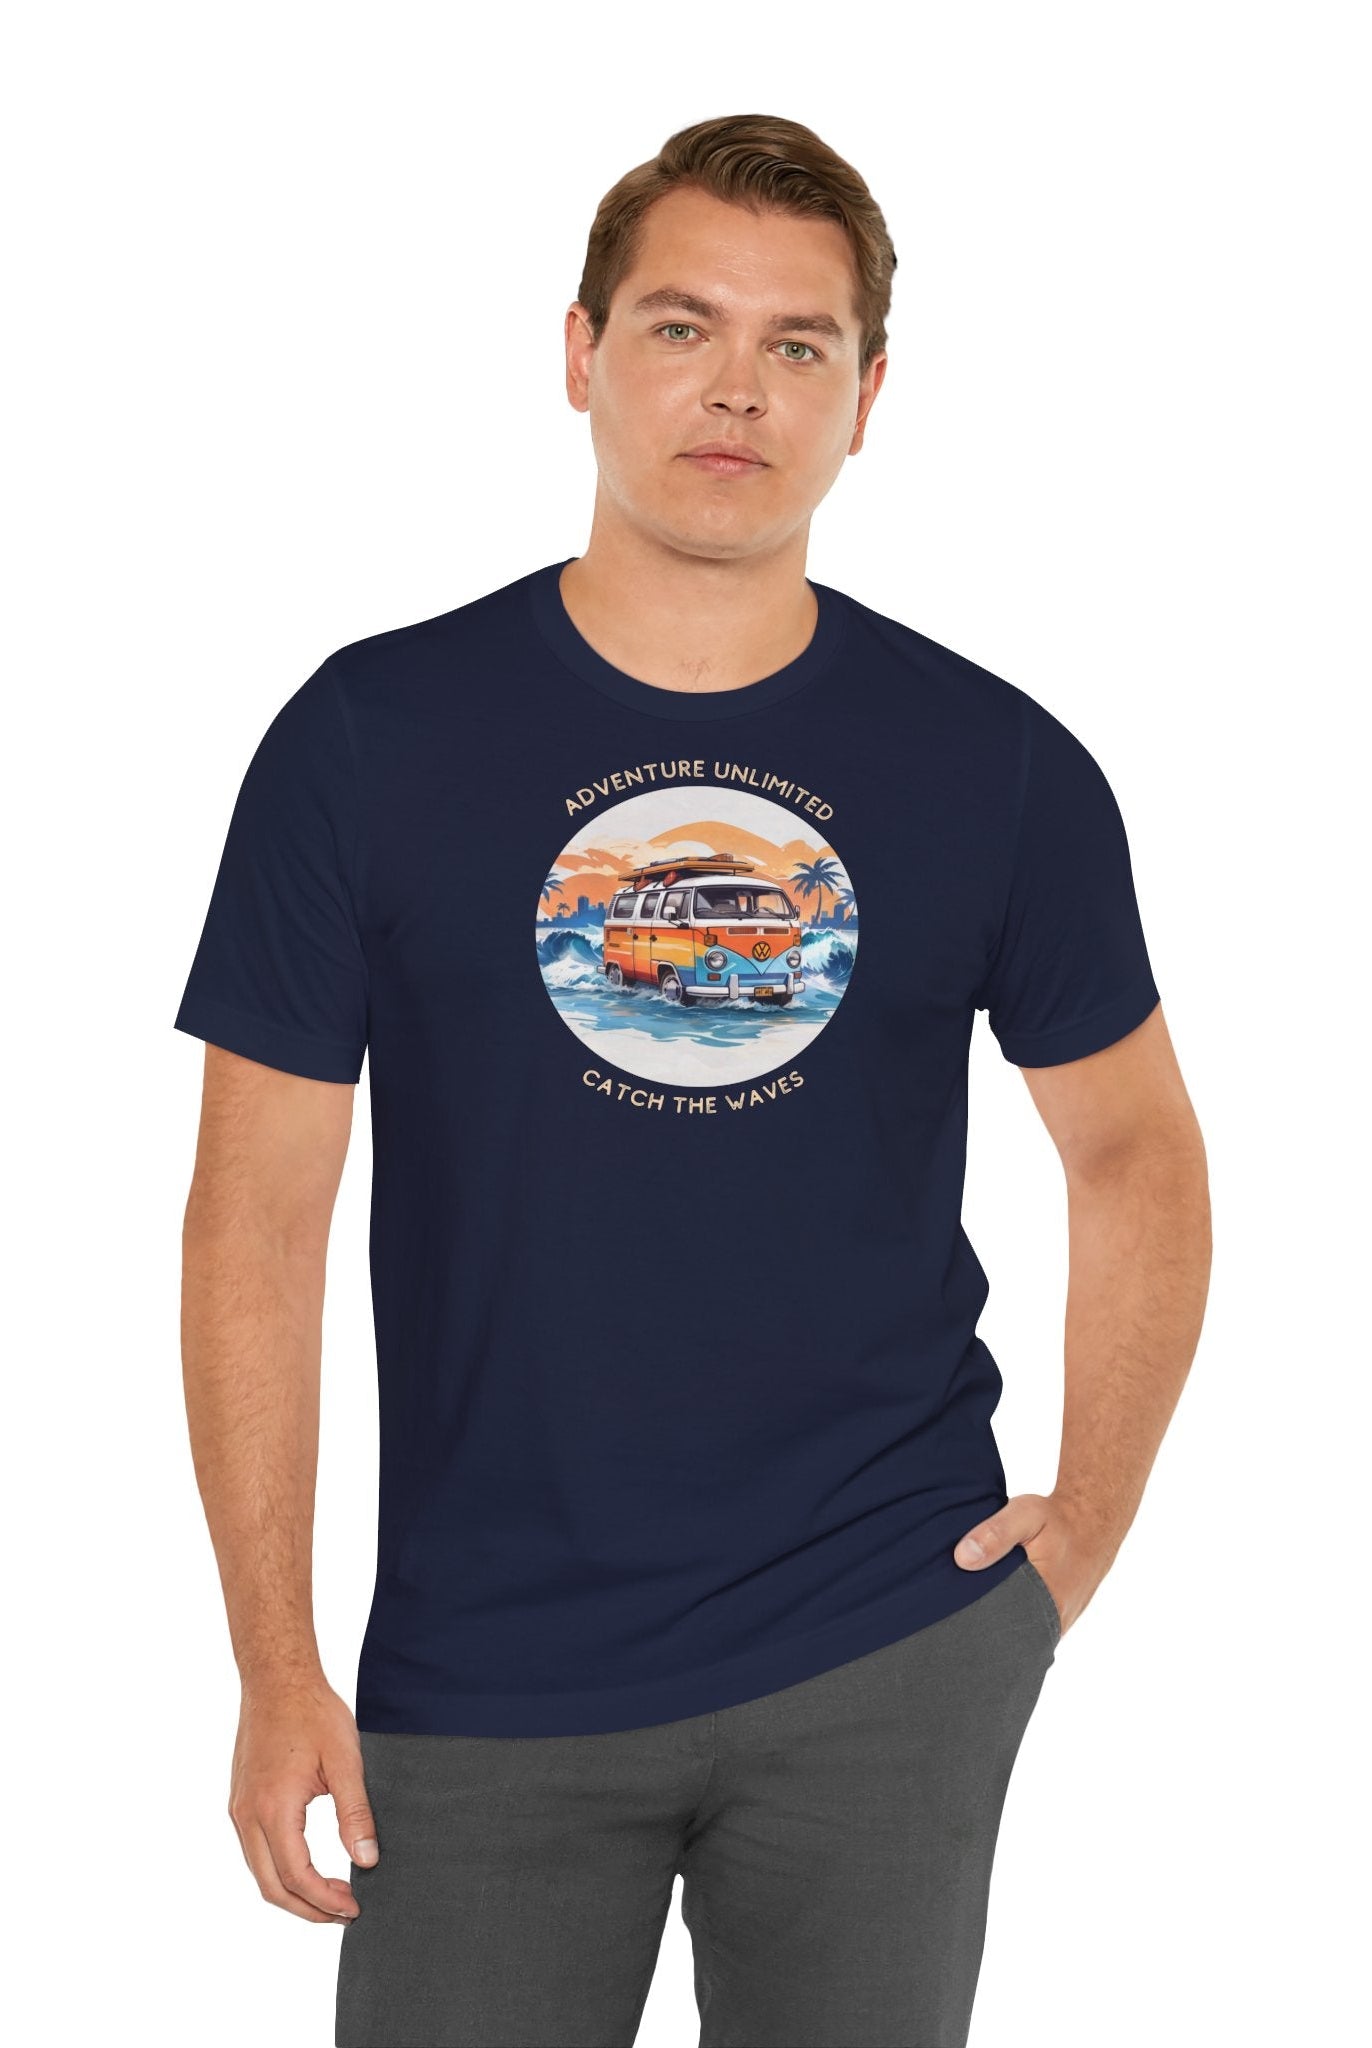 Man in navy Adventure Unlimited Surfing T-shirt with ’the best day in the world’ printed - Bella & Canvas EU